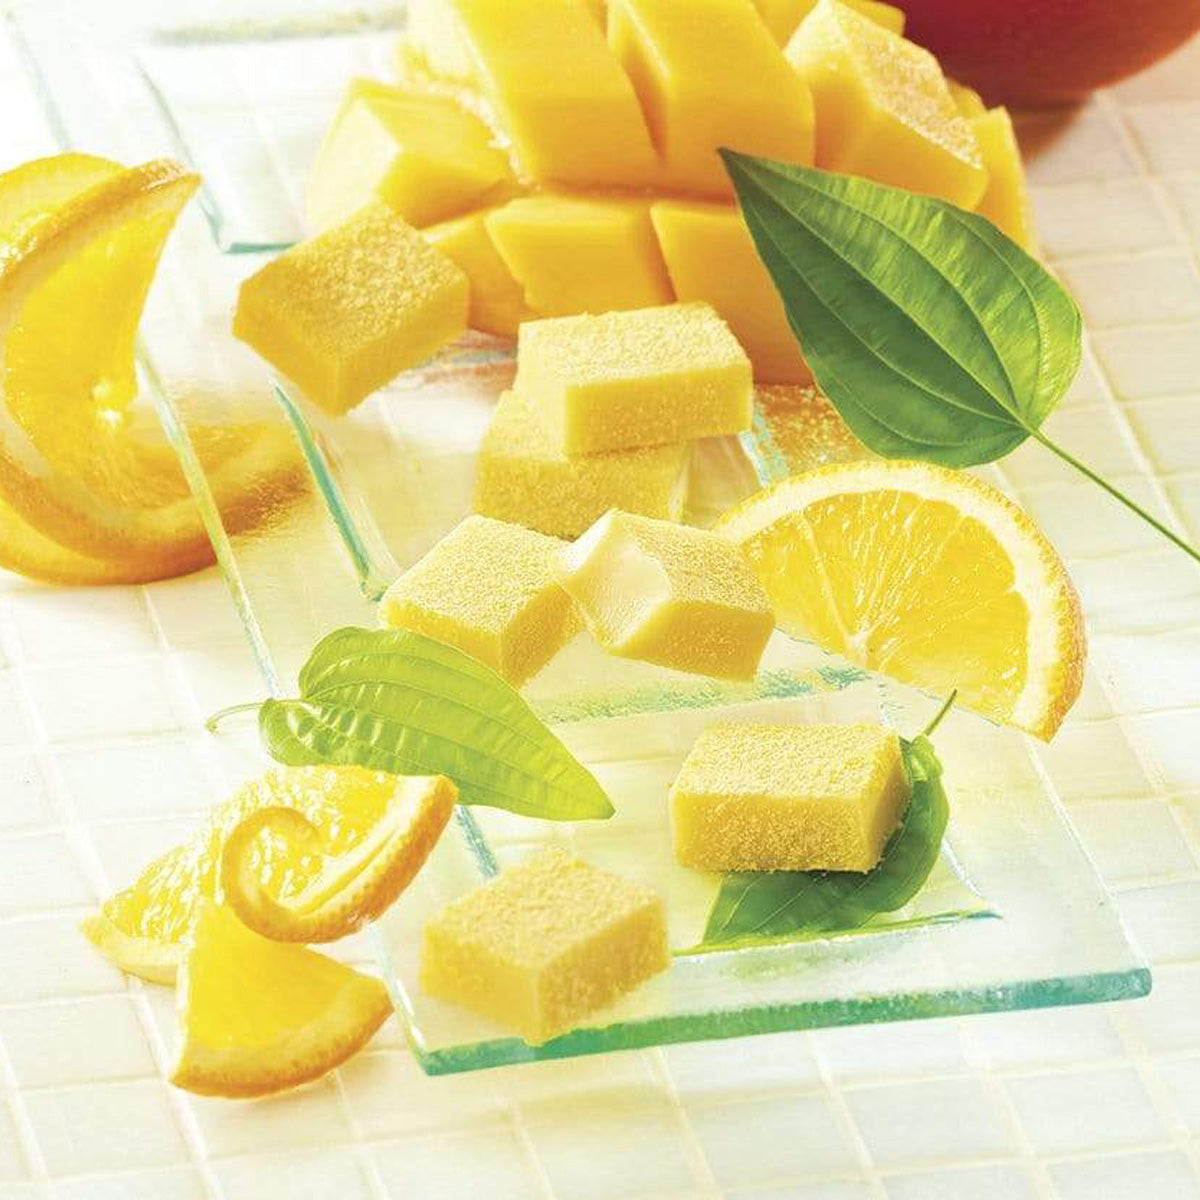 ROYCE' Chocolate - Nama Chocolate "Orange & Mango" - Image shows yellow blocks of chocolate on a clear plate with fruits like orange and mangoes with accents of green leaves. Background features white tiles.